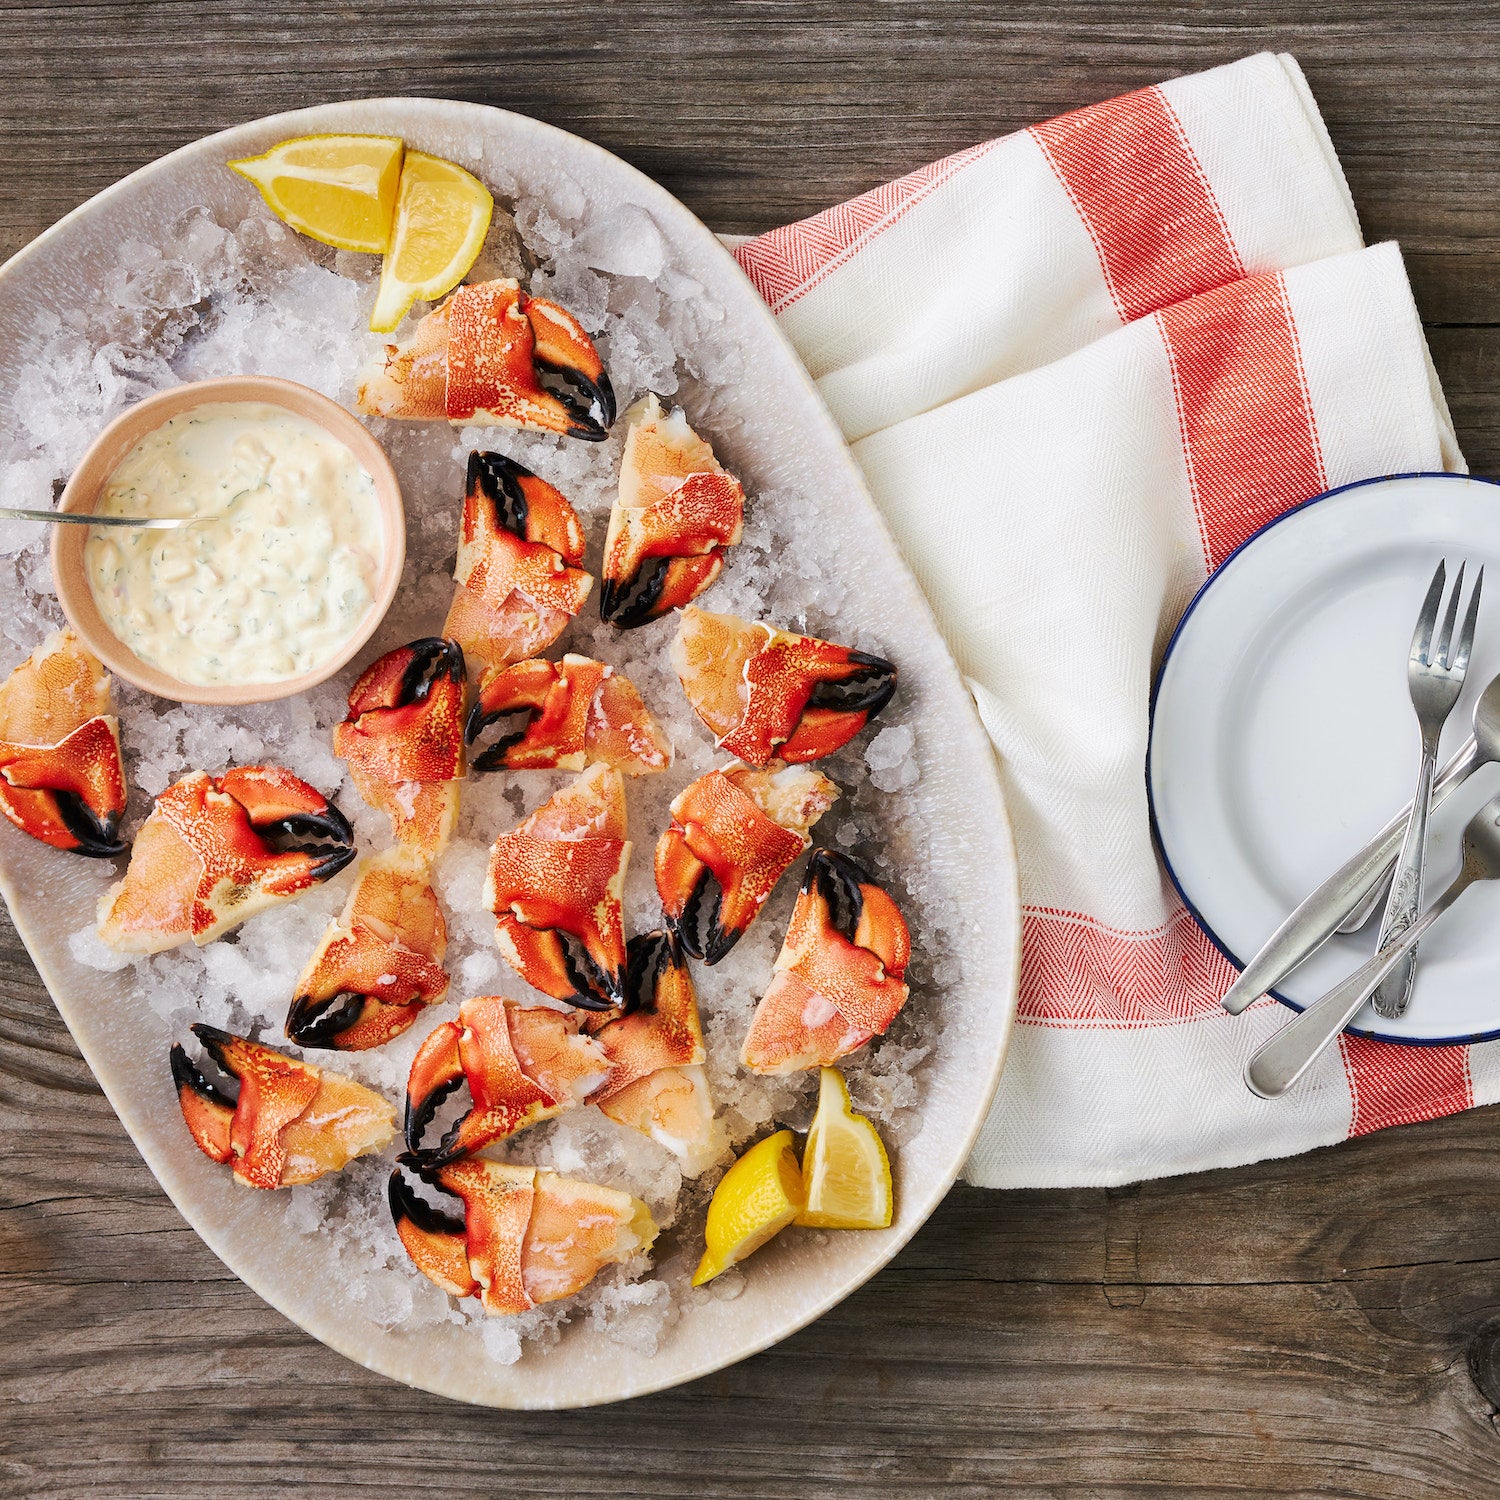  This image shows over a dozen crab claws resting on a tray of chipped ice alongside lemon wedges and a creamy sauce to enjoy together.